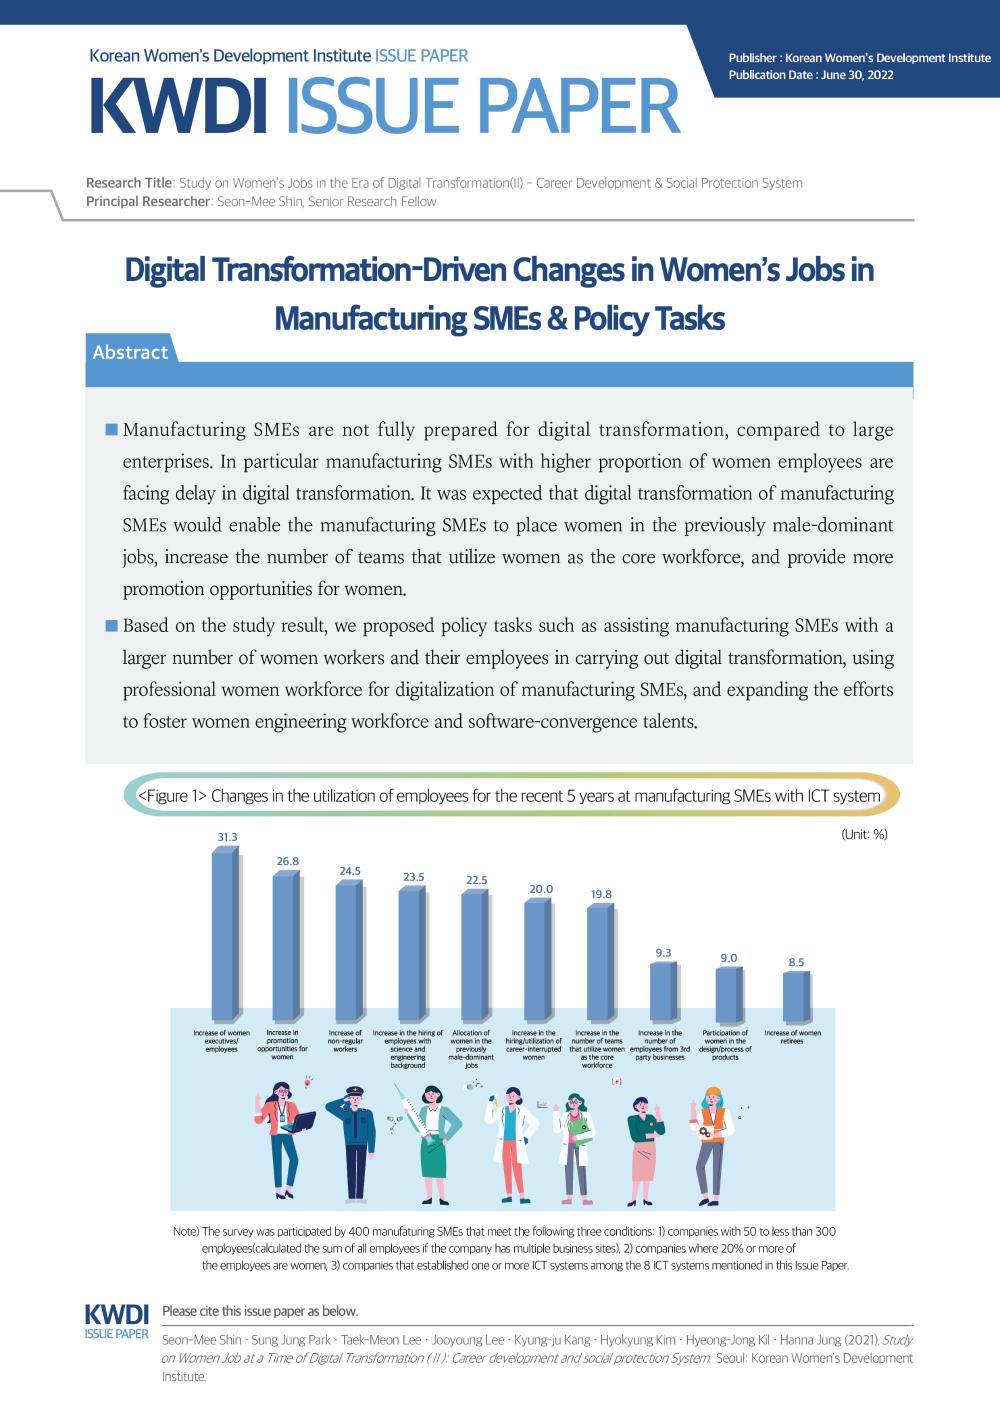 [Issue Paper] Digital Transformation-Driven Changes in Women's Jobs in Manufacturing SMEs and Policy Tasks